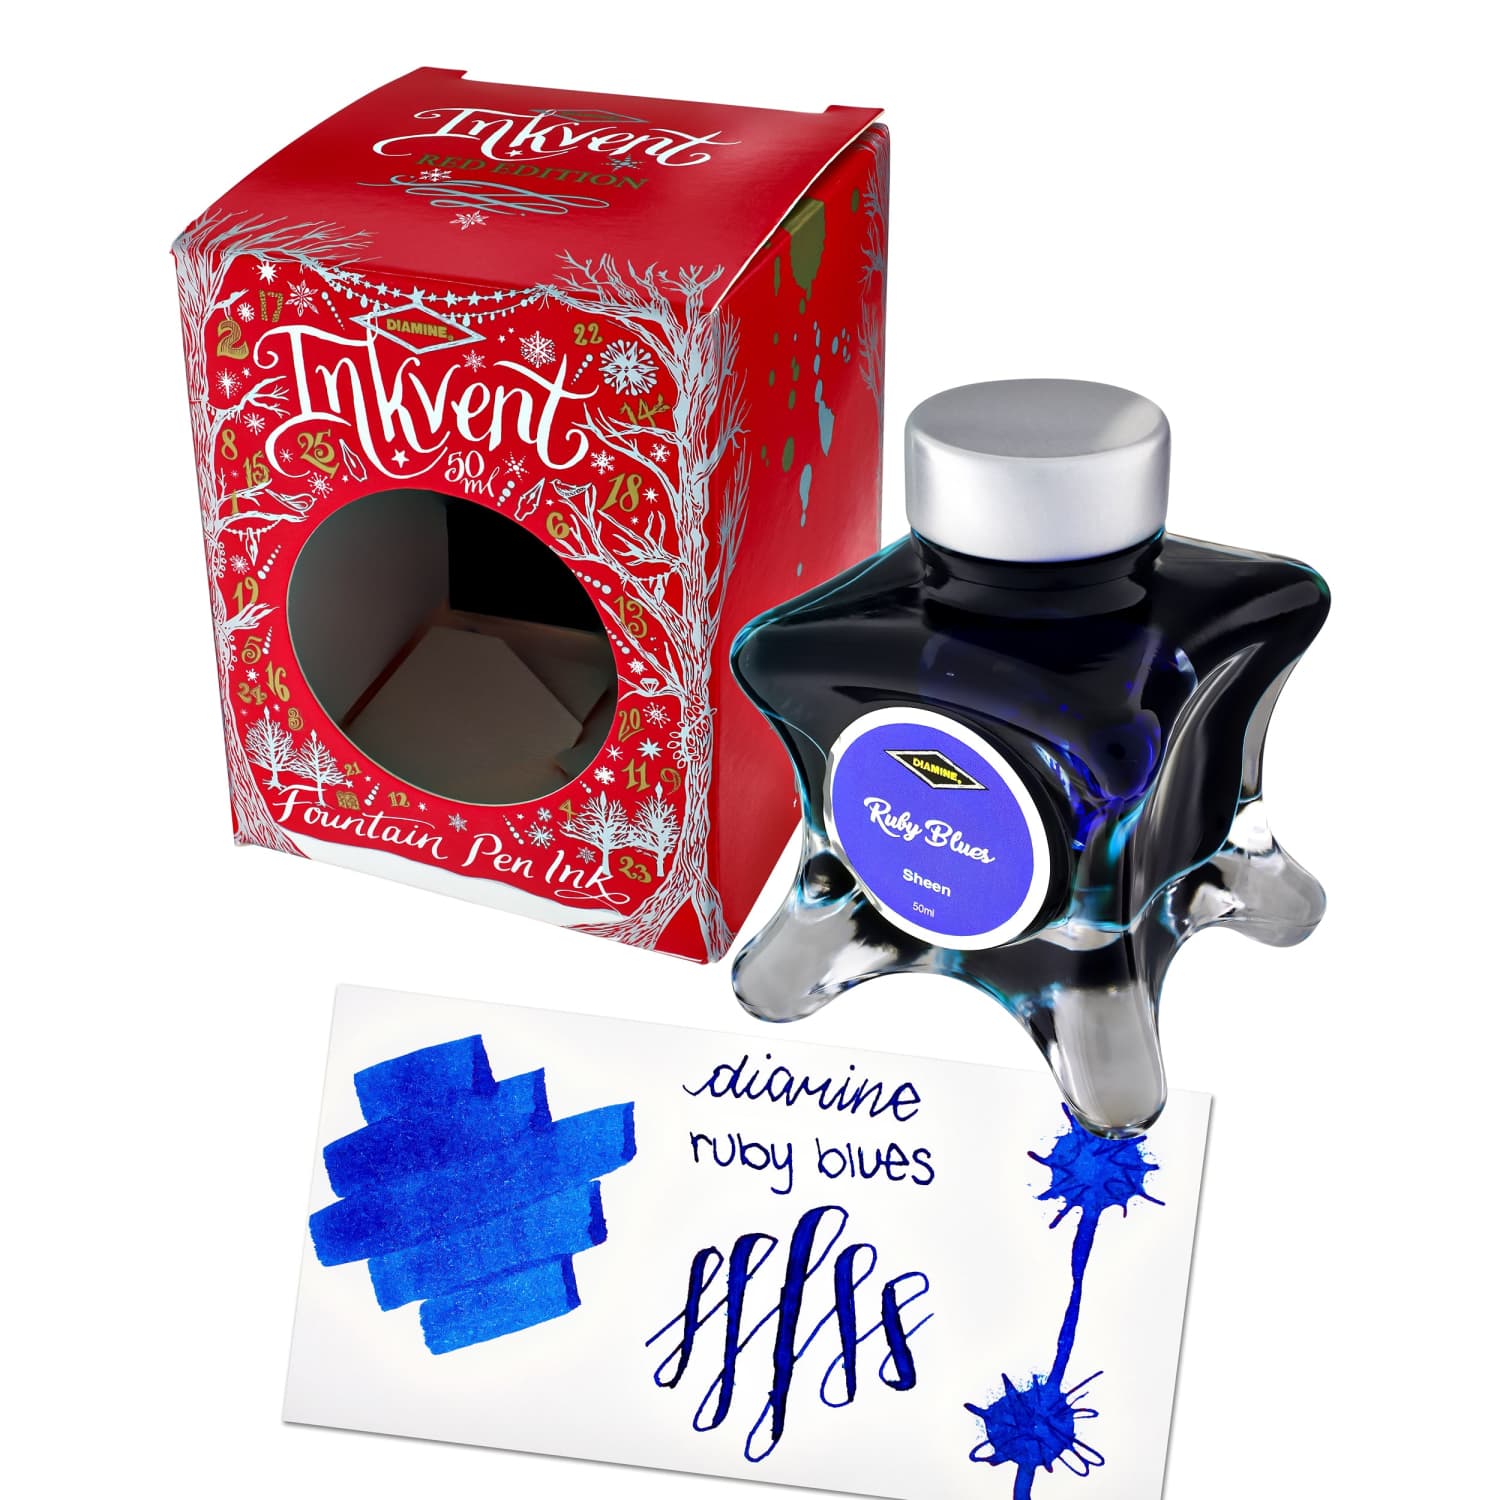 Lọ Mực Diamine Inkvent Red Edition Ruby Blues Sheen 50ml